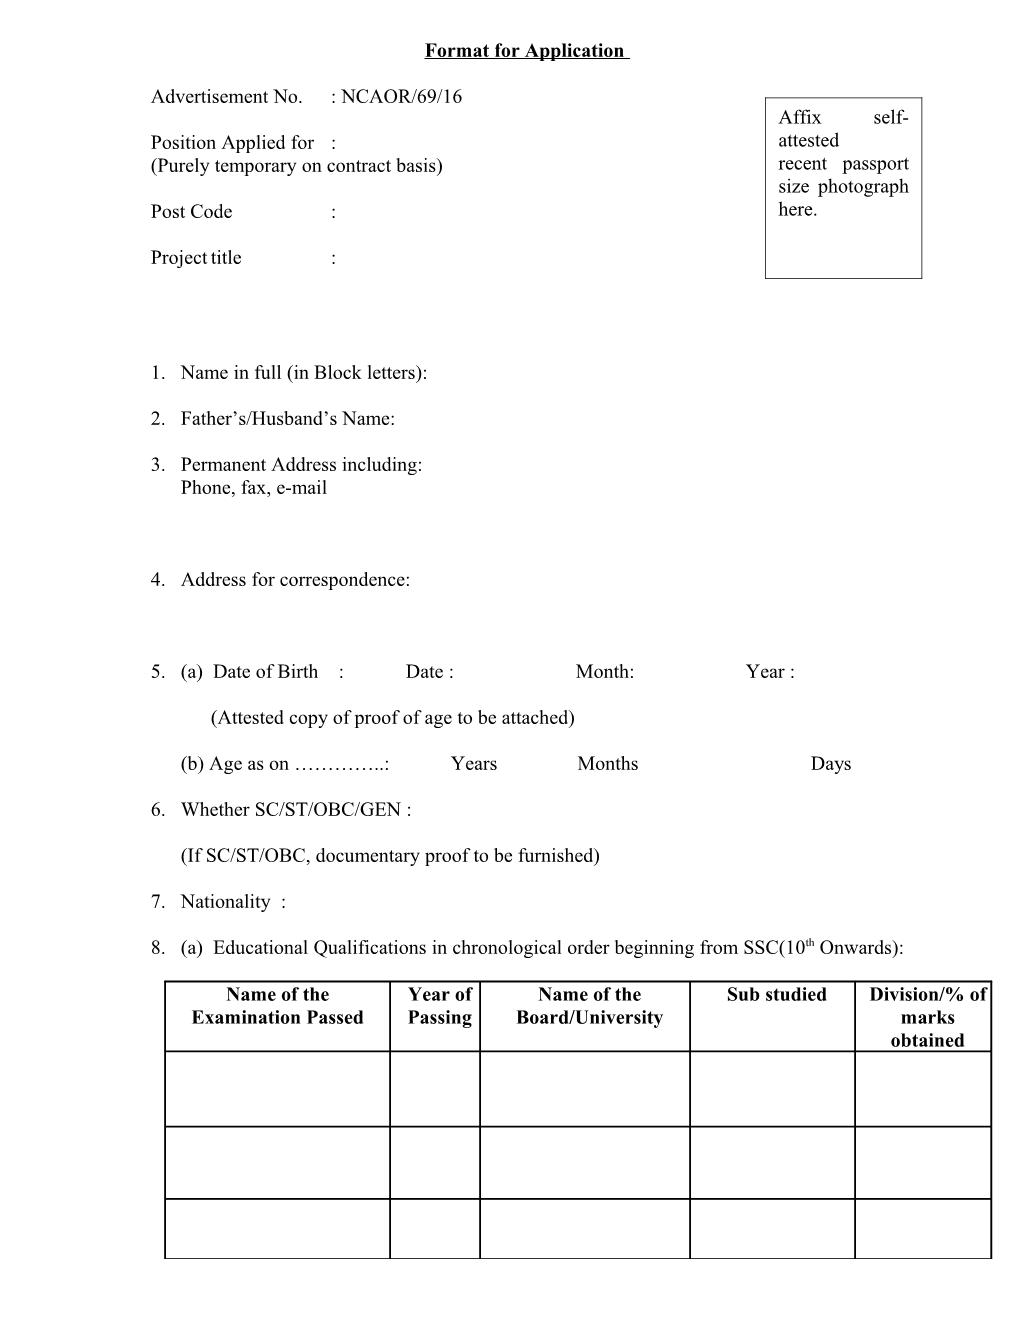 Format of the Application Form